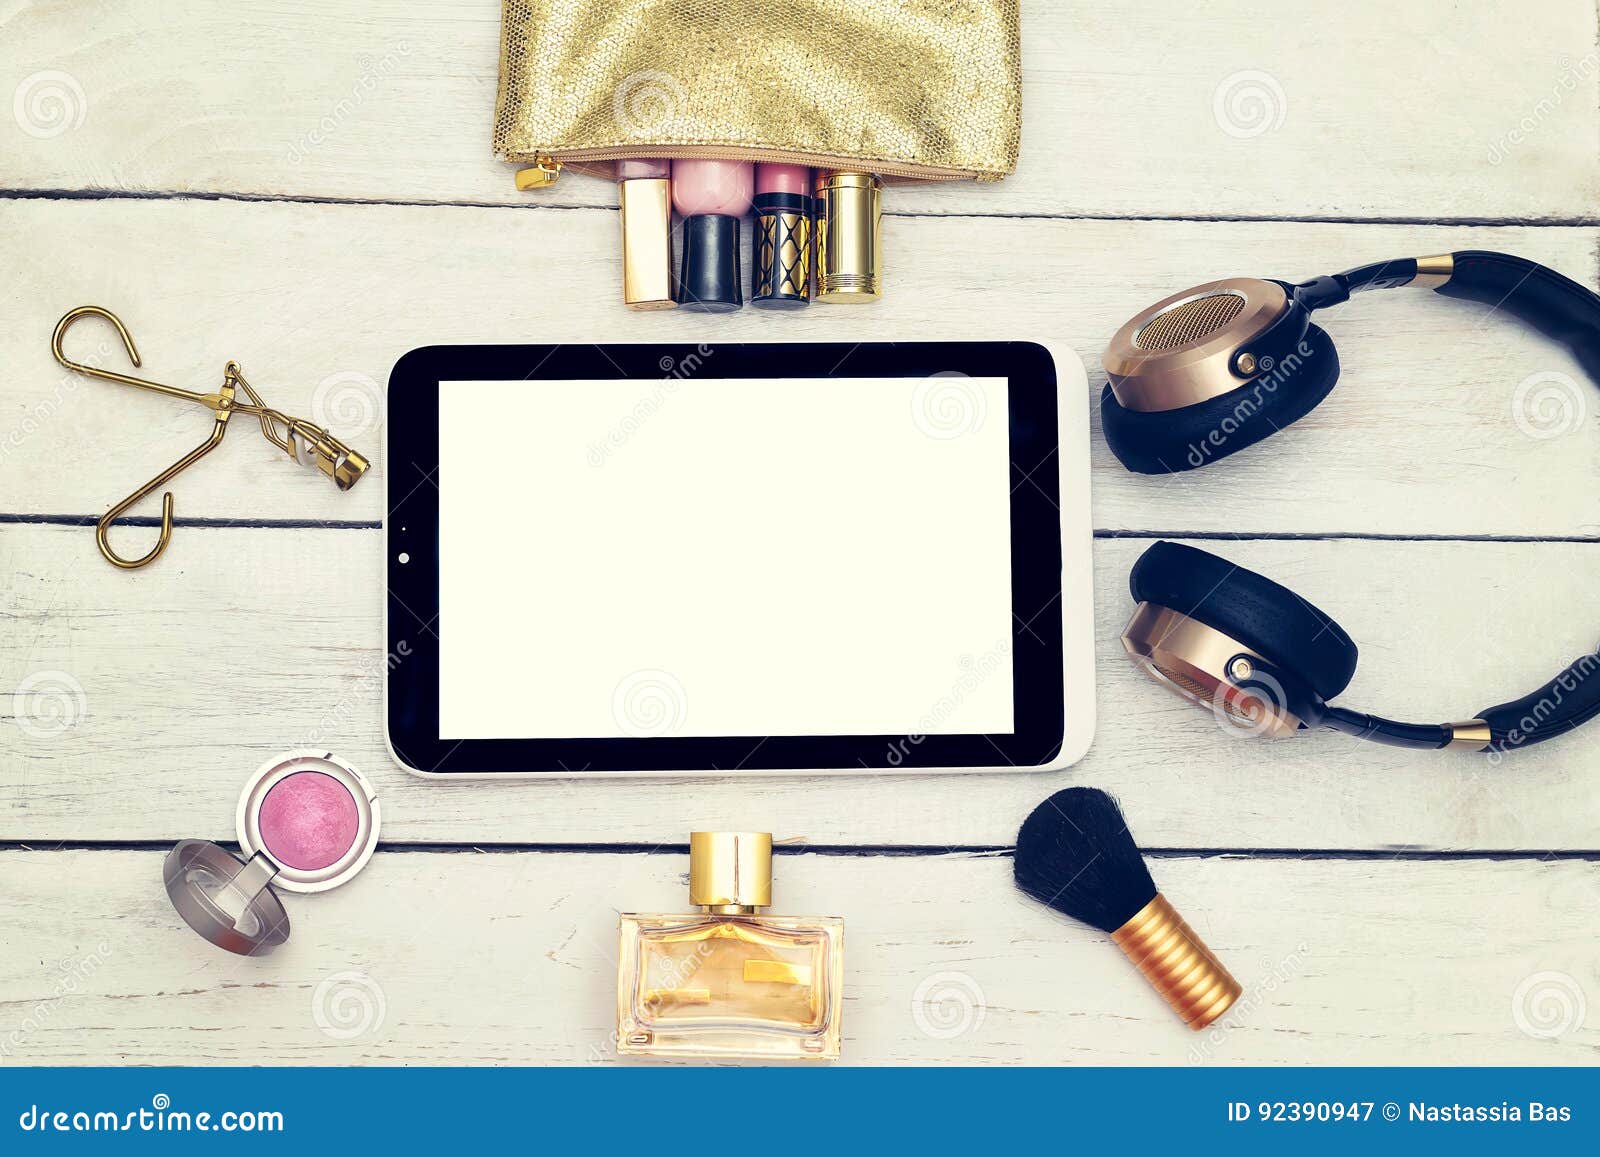 Instagram Filter. Fashion Mockup with Business Lady Accessories Stock ...